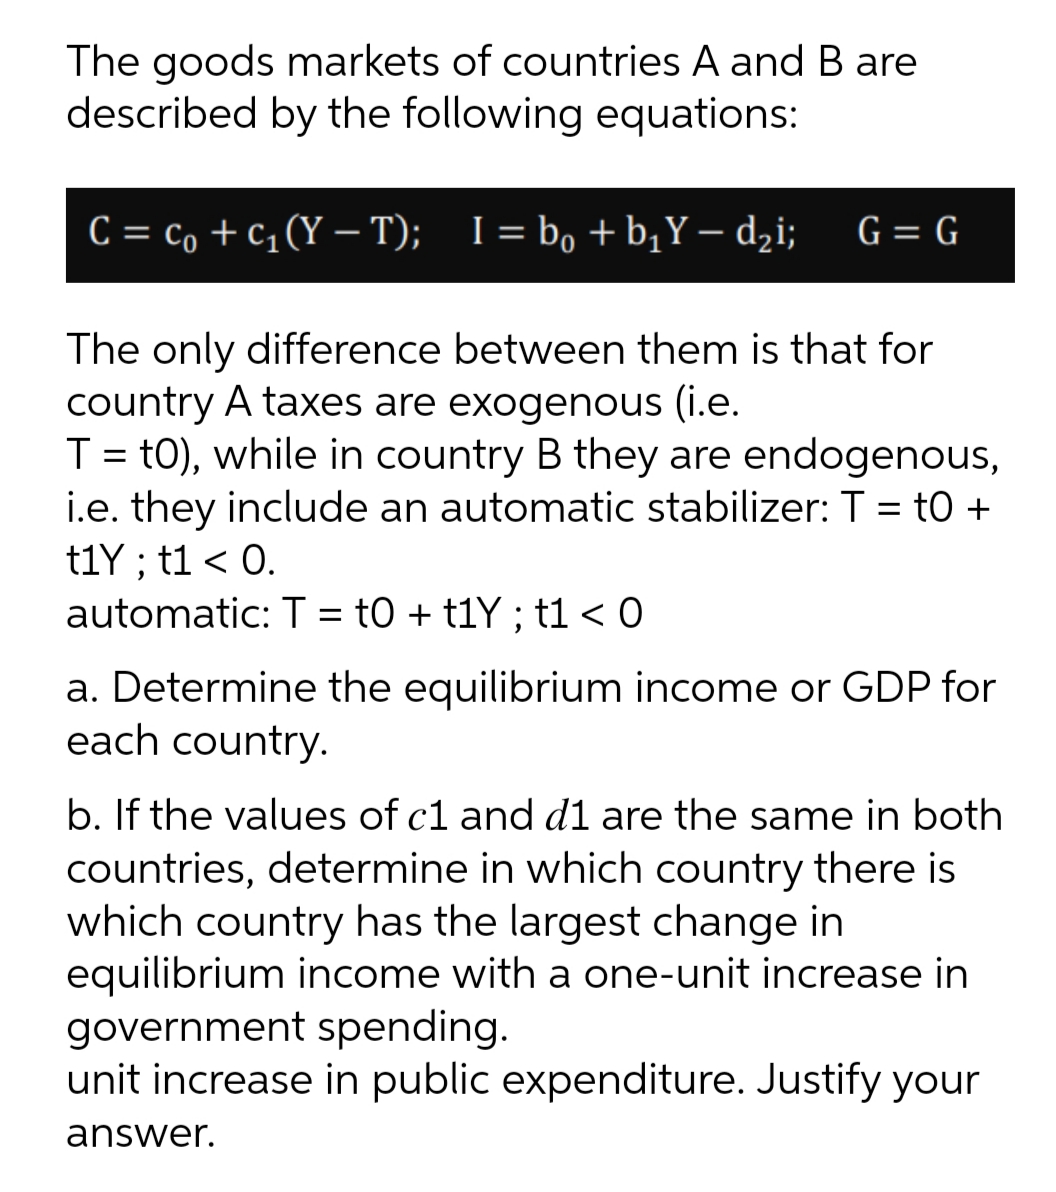 The goods markets of countries A and B are
described by the following equations:
C = c, + c1(Y – T); I= bo +b,Y – dzi;
G = G
The only difference between them is that for
country A taxes are exogenous (i.e.
T = t0), while in country B they are endogenous,
i.e. they include an automatic stabilizer: T = t0 +
t1Y ; t1 < 0.
automatic: T = tO + t1Y ; t1 < 0
a. Determine the equilibrium income or GDP for
each country.
b. If the values of c1 and d1 are the same in both
countries, determine in which country there is
which country has the largest change in
equilibrium income with a one-unit increase in
government spending.
unit increase in public expenditure. Justify your
answer.
